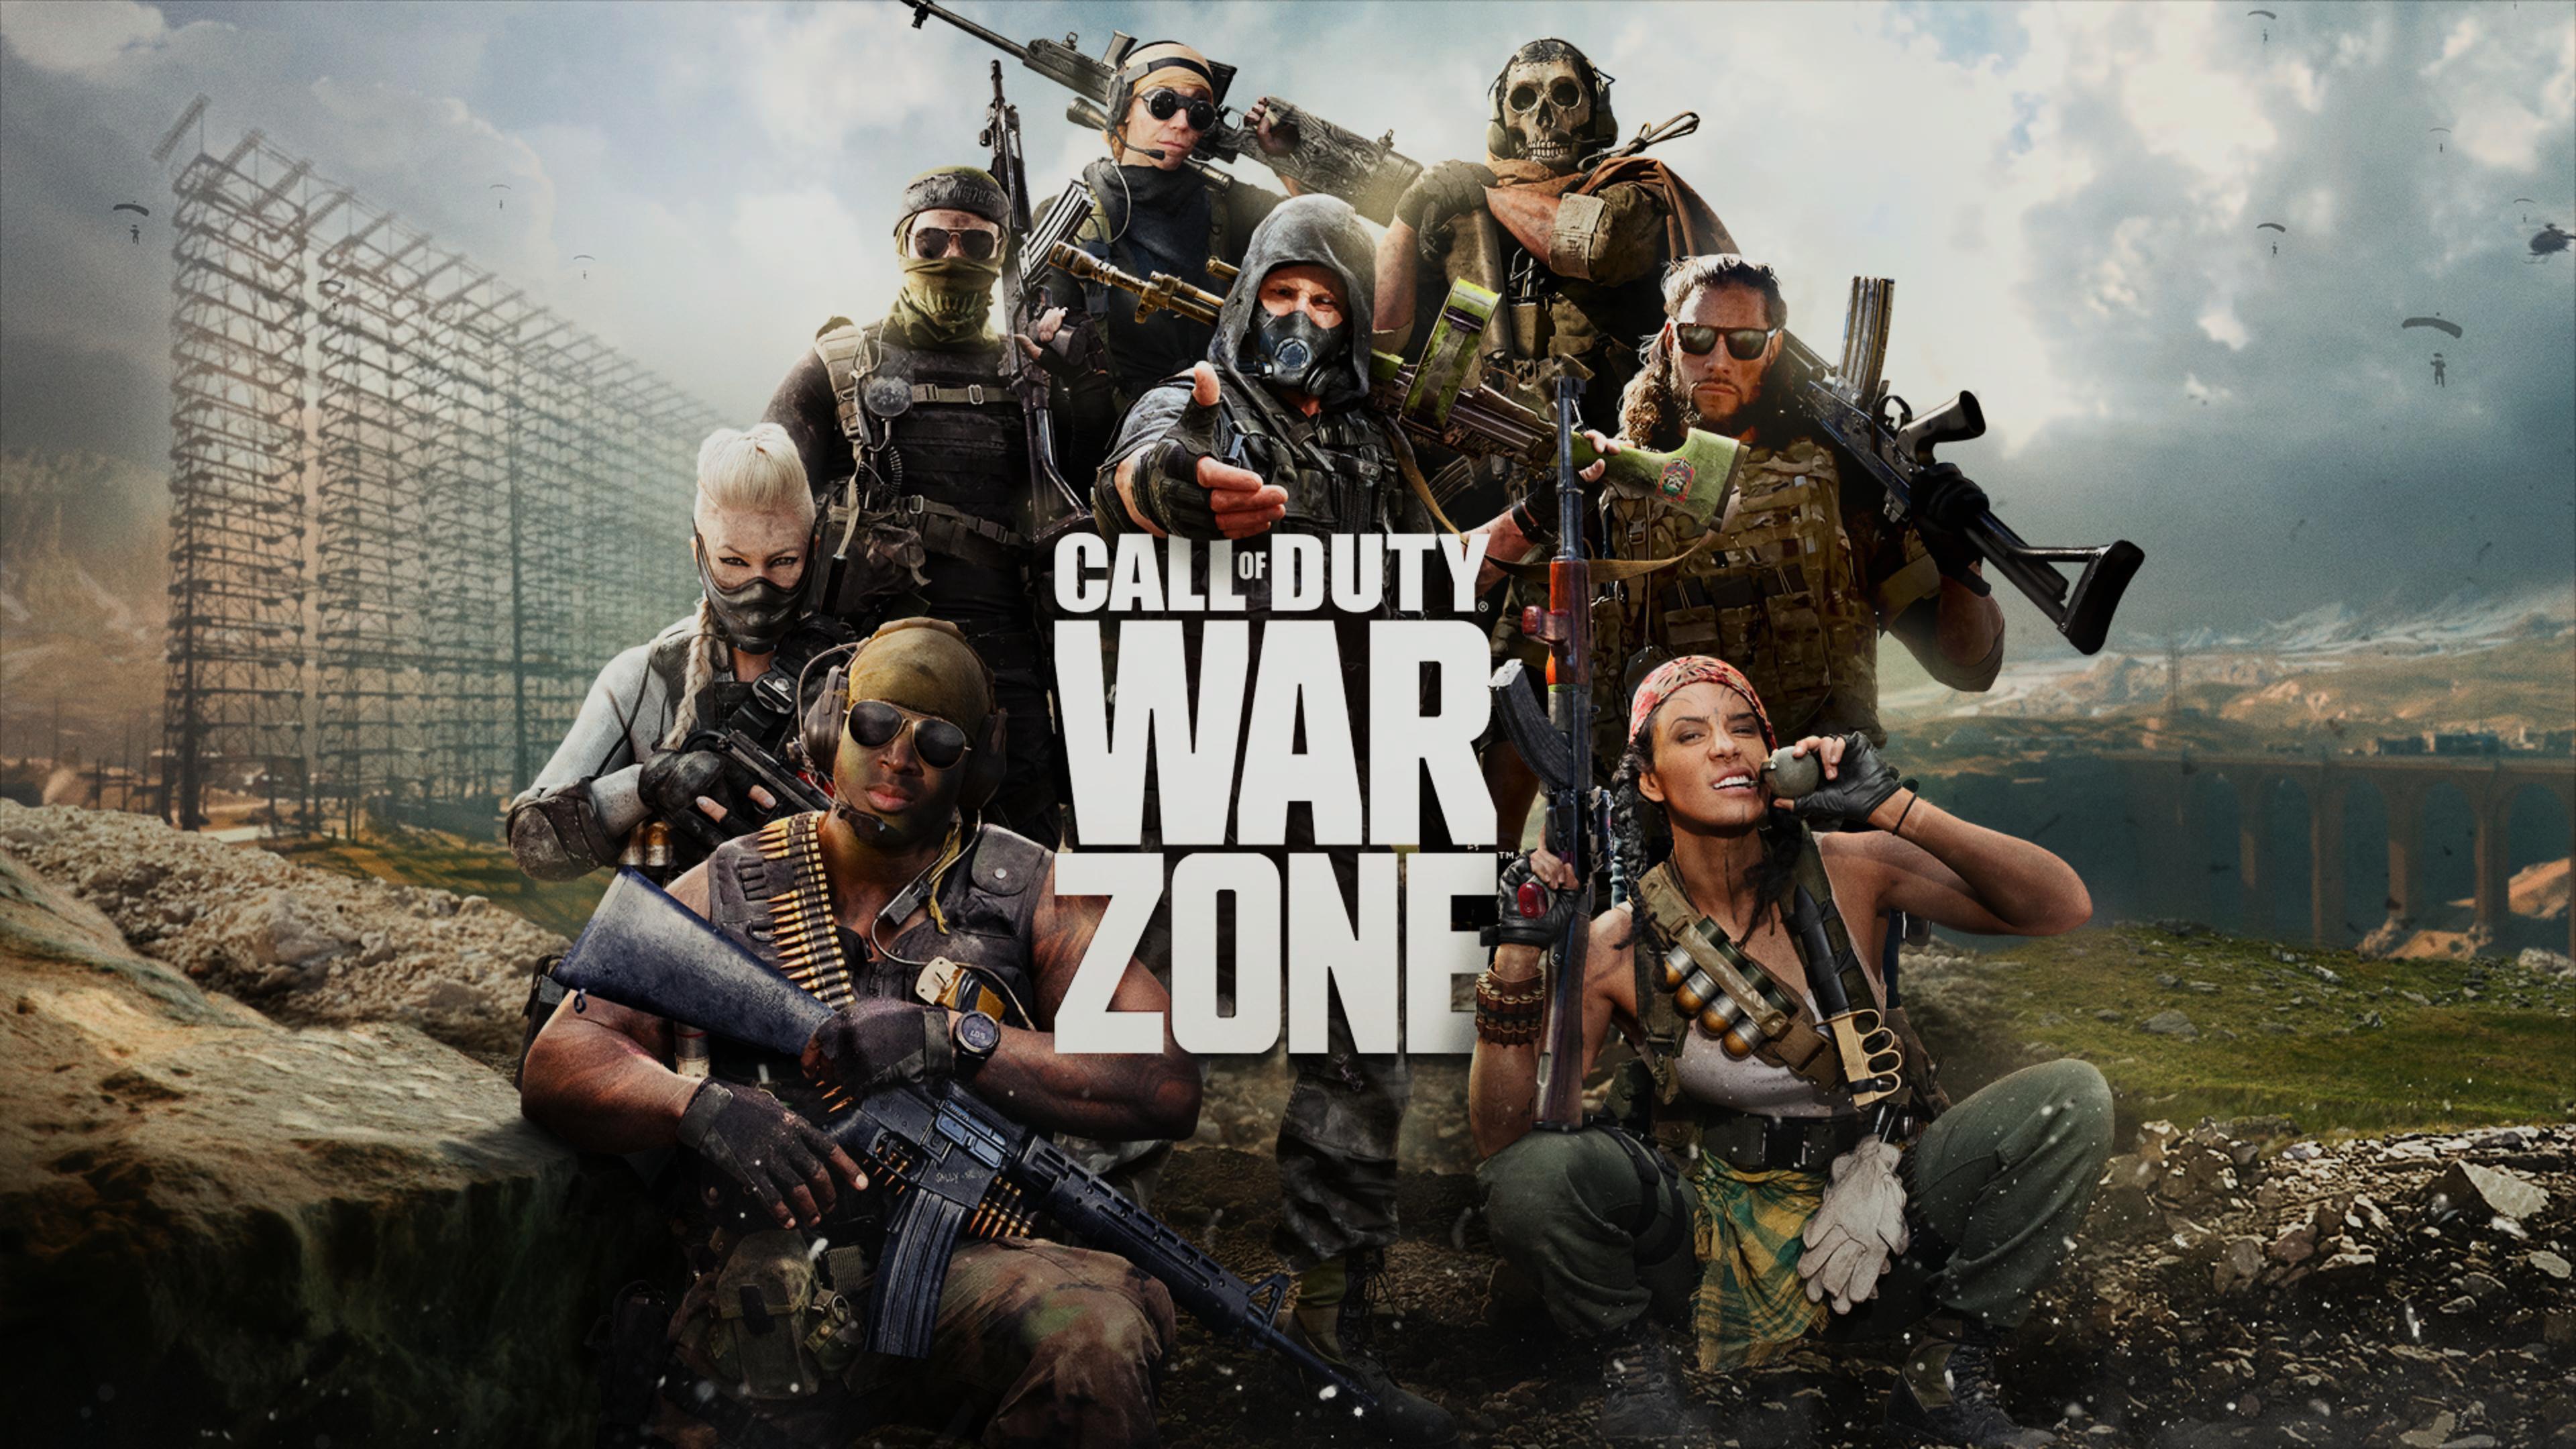 Warzone 2.0 will launch shortly after Call of Duty: Modern Warfare 2